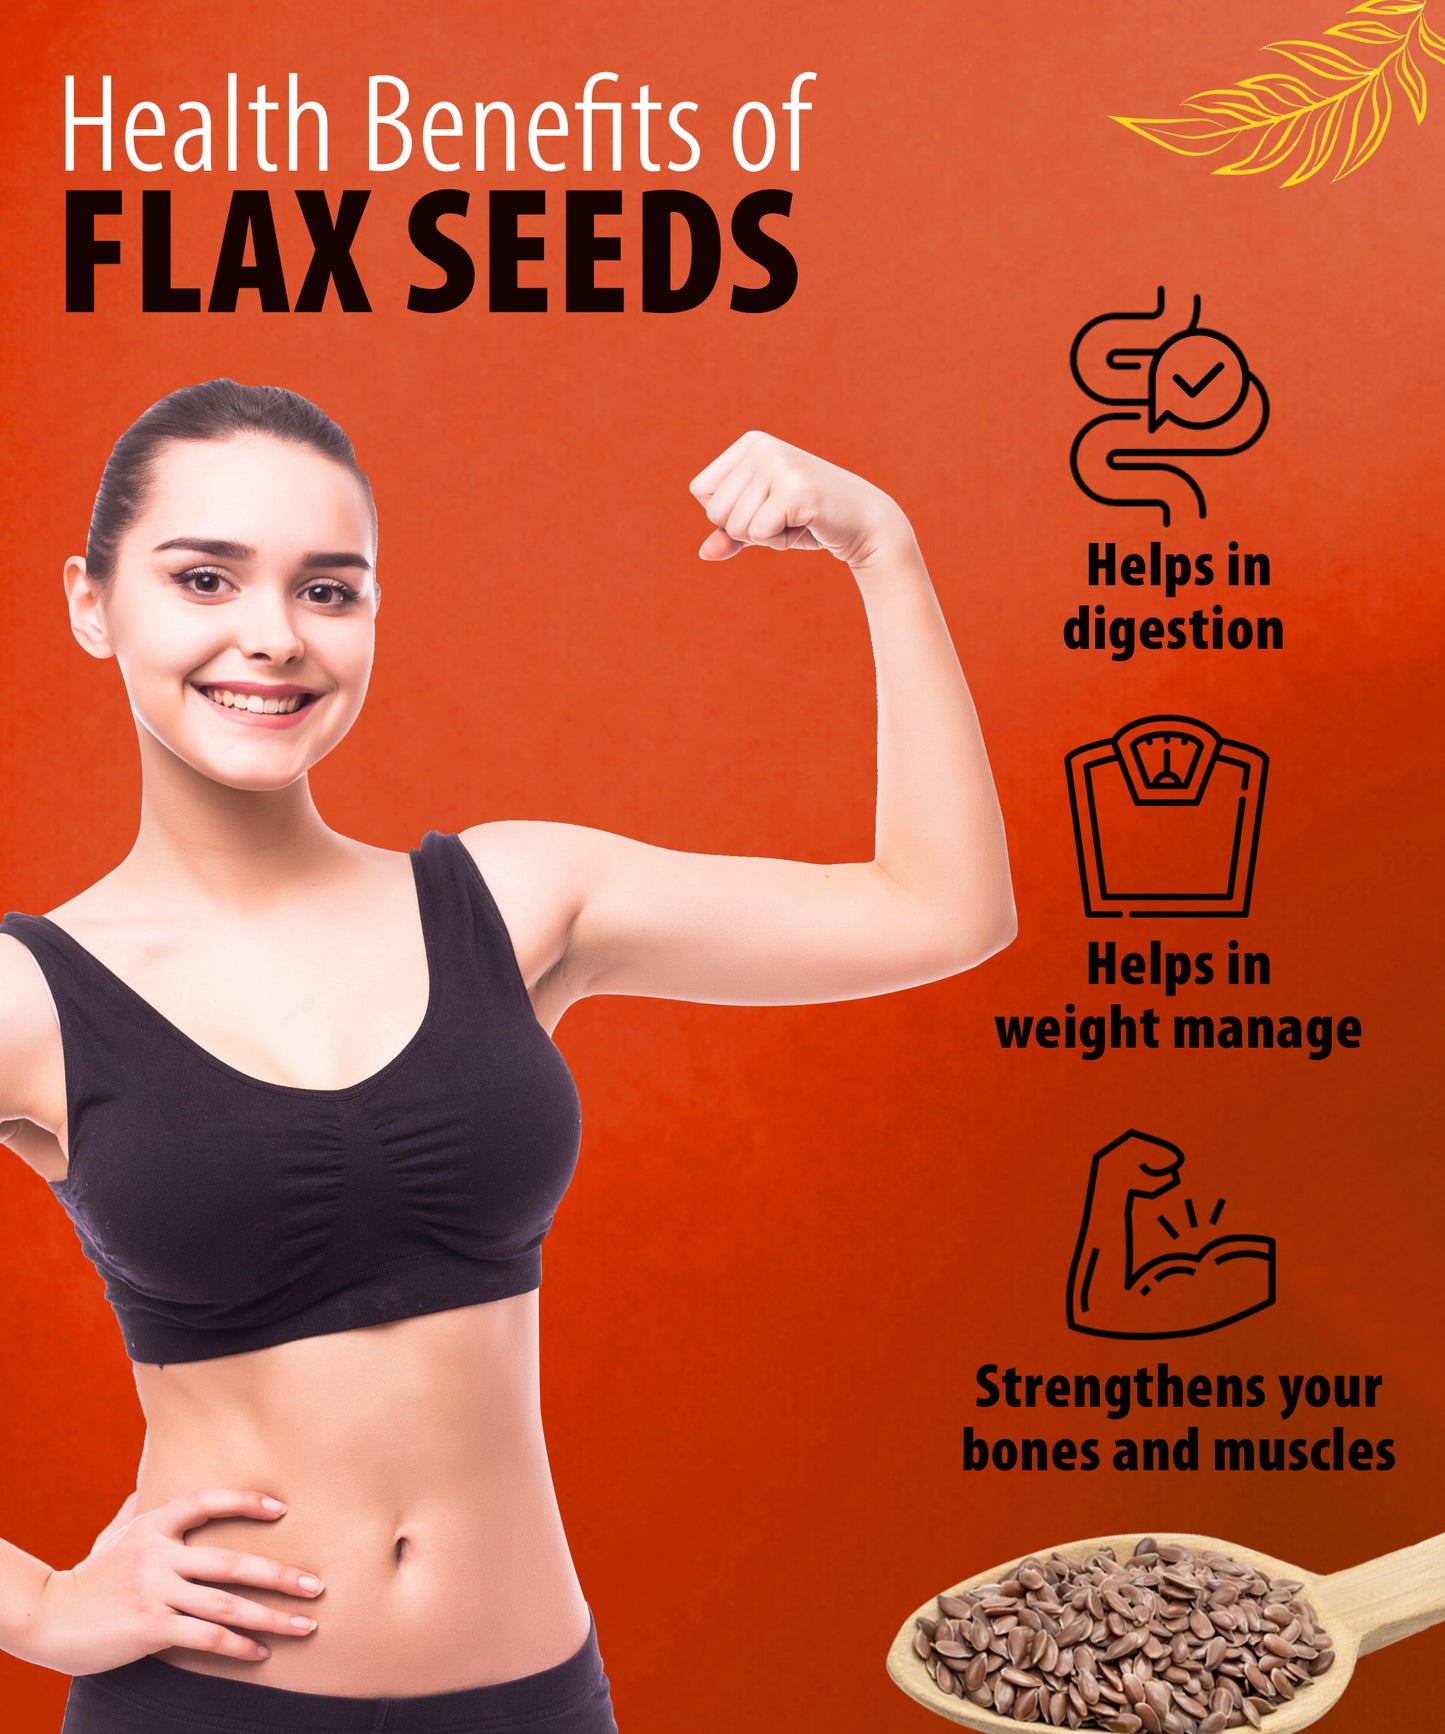 NutroVally Mix seeds for Eating Mix seeds for Weight Loss (200g*4) Each Pack 200g